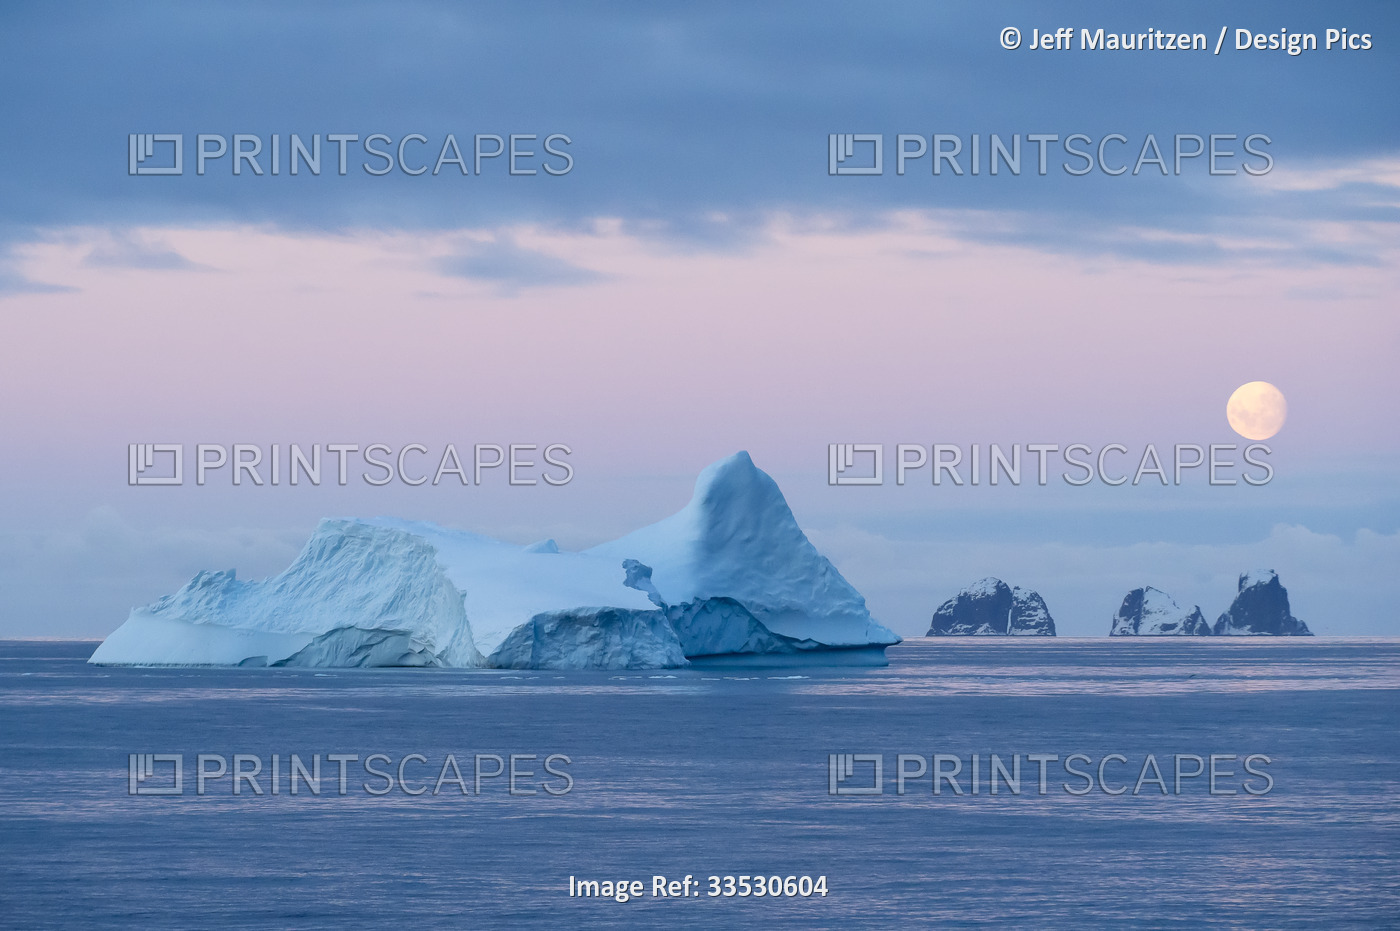 Full moon sets over icebergs and mountainous islands in the Gerlache Strait off ...